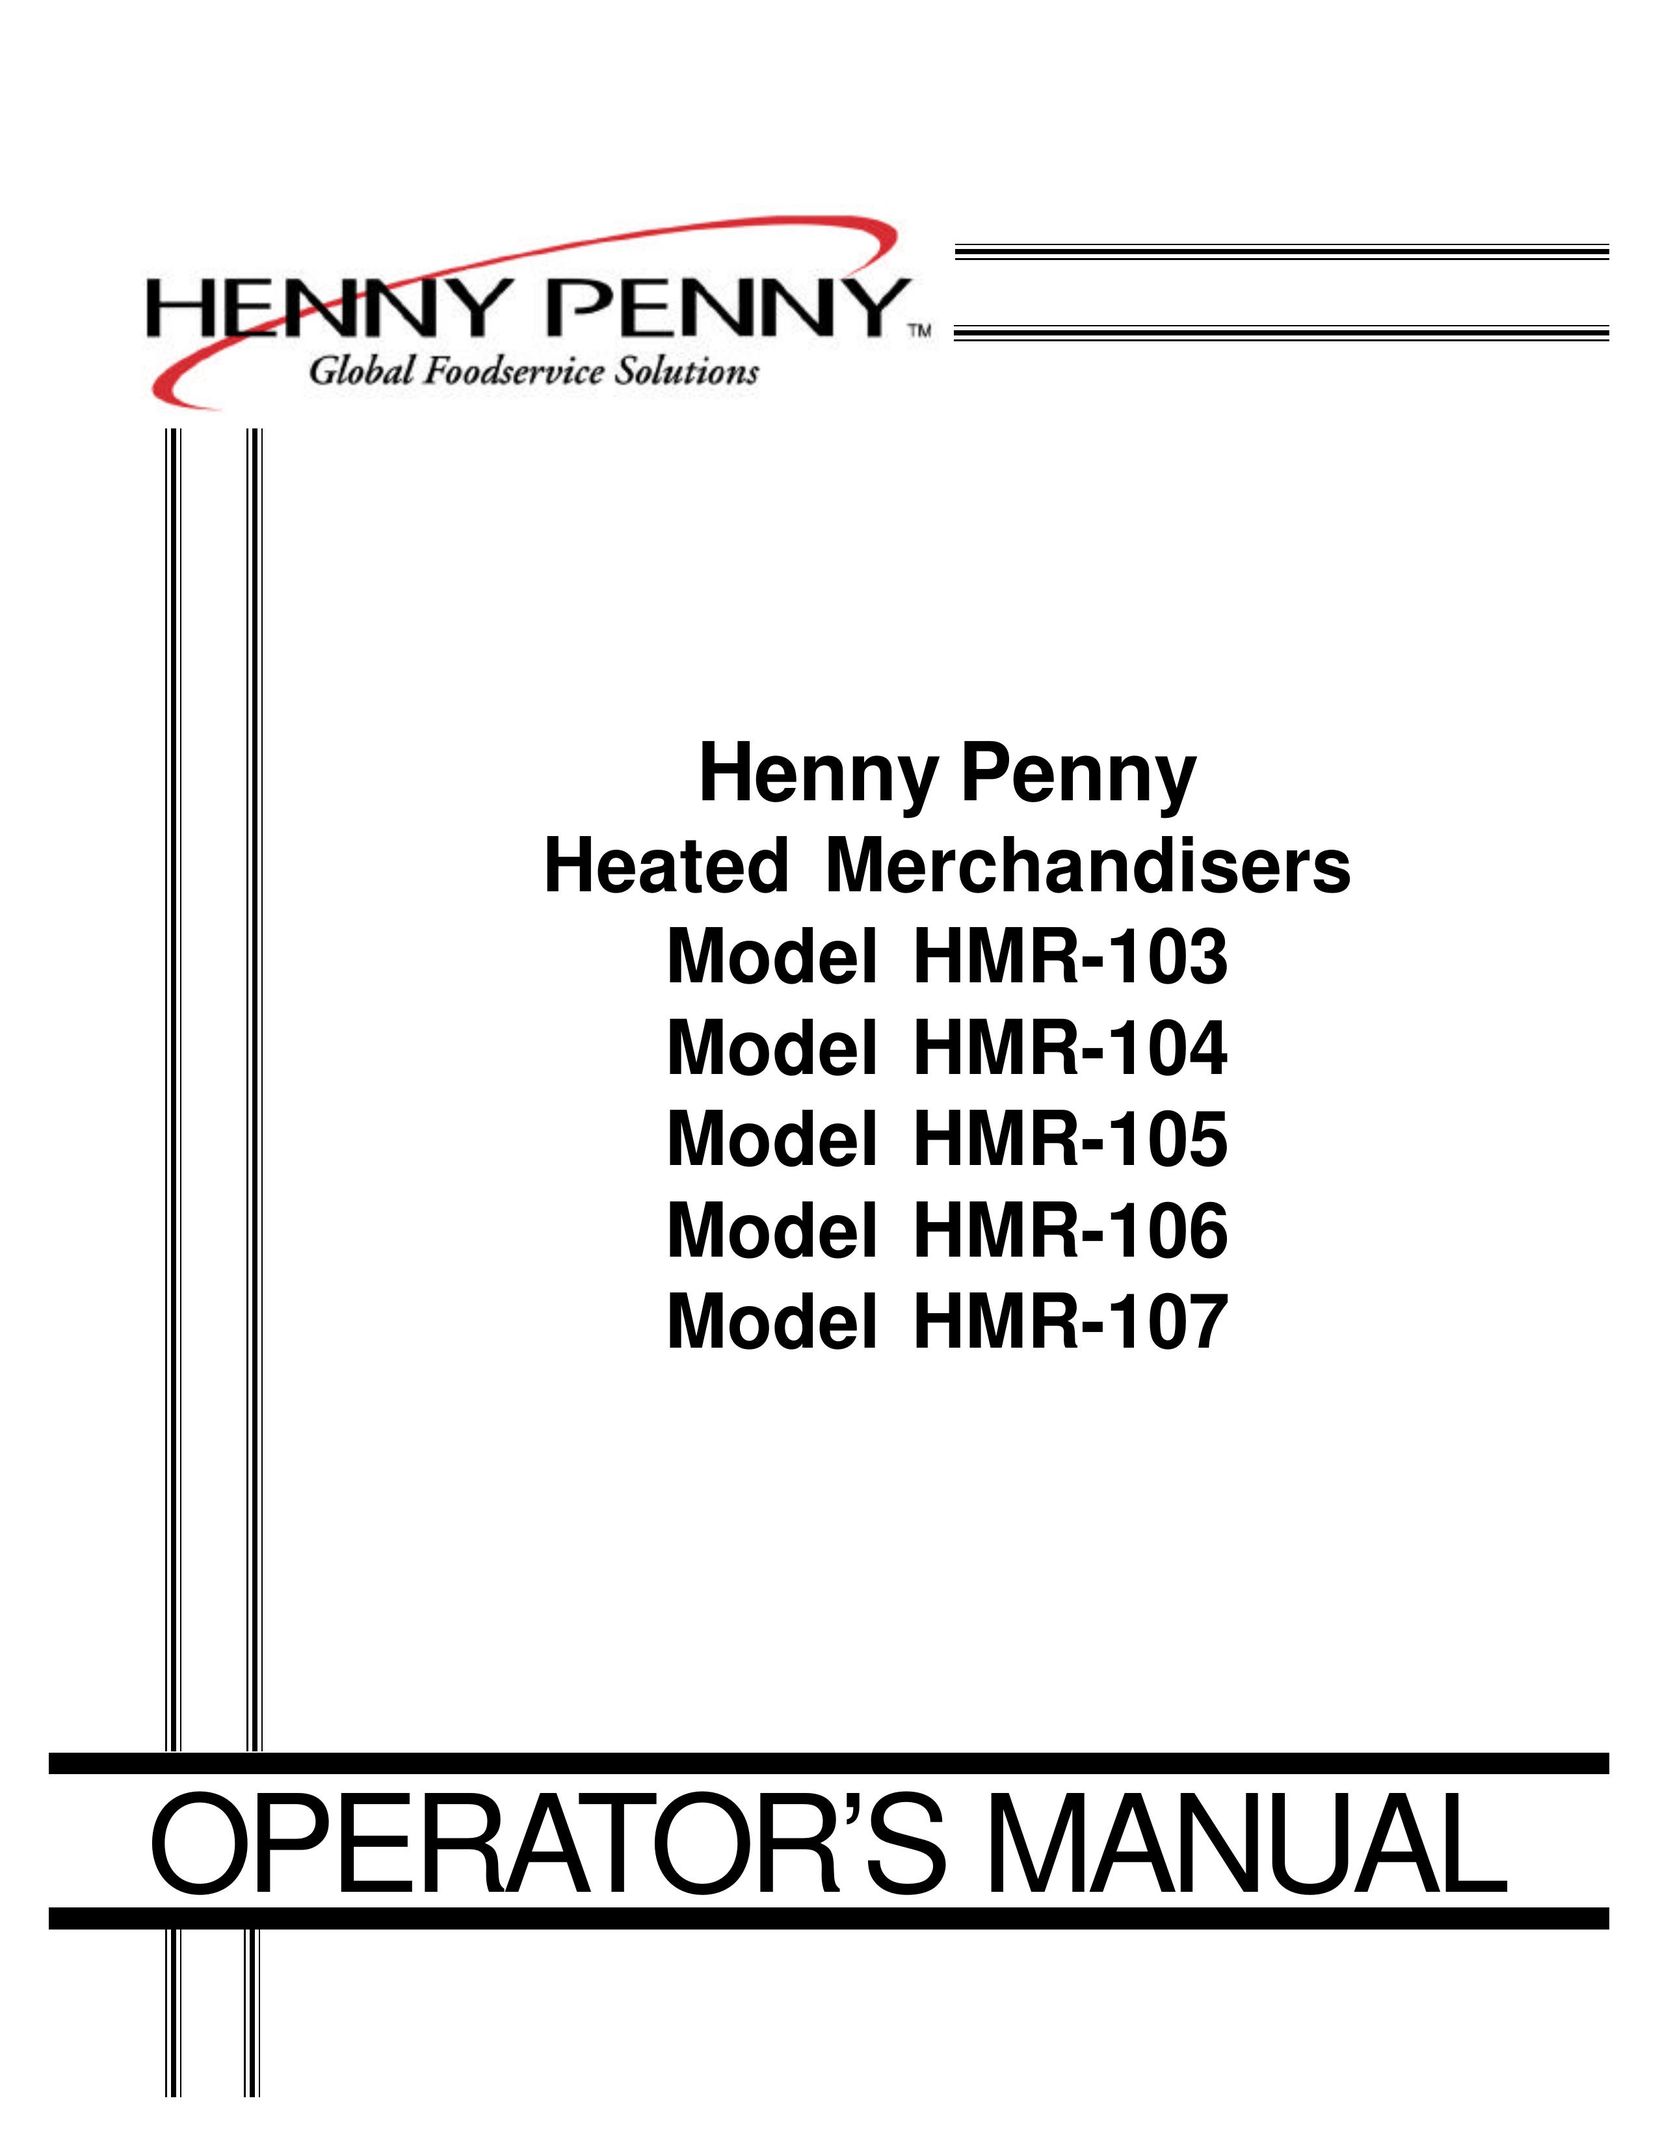 Henny Penny HMR-105 Electric Heater User Manual